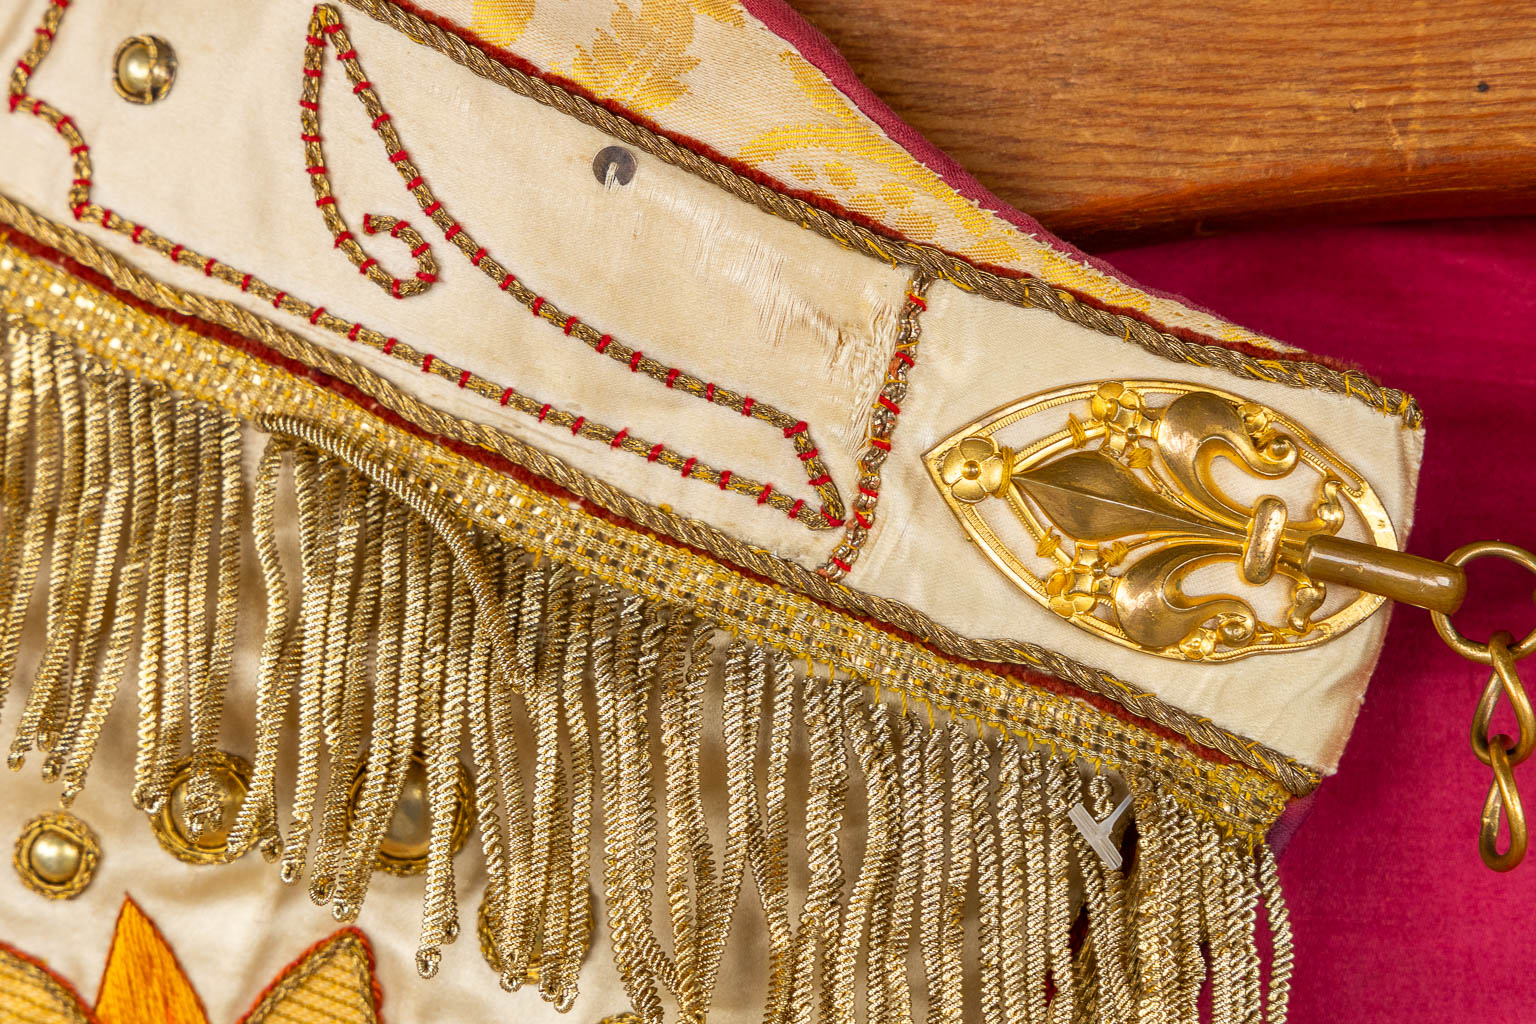 A cope, gold-thread embroideries with an image of Jesus Christ with a sacred heart.  